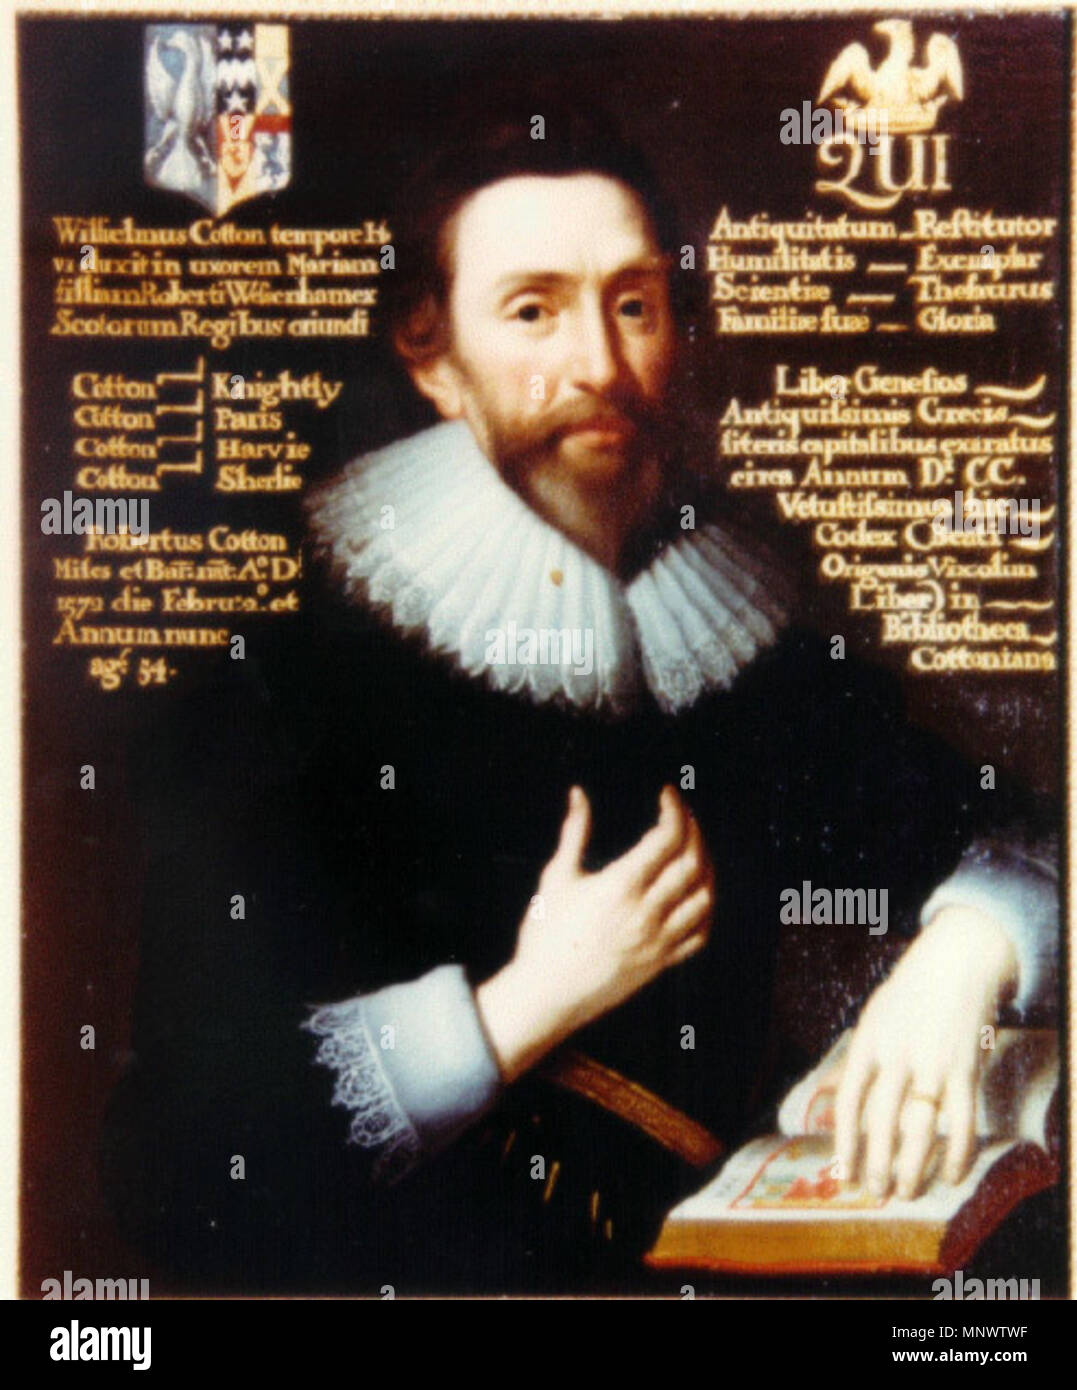 . Portrait of Sir Robert Cotton, 1st Baronet (d.1631) of Connington. Collection of Society of Antiquaries, London. Arms of Cotton (Ancient): Argent, a bend sable between three pellets. The arrangement as seen on monuments in Exeter Cathedral to Bishop William Cotton (d.1621), Bishop of Exeter and on monument to his grandson Edward Cotton (d.1675), Treasurer of Exeter Cathedral, may be th result of 20th c. restoration.(See images[1]). William Cotton (fl.1378,1400) lord of the manor of Cotton in Cheshire, married Agnes de Ridware, daughter and heiress of Walter de Ridware, lord of the manor of H Stock Photo